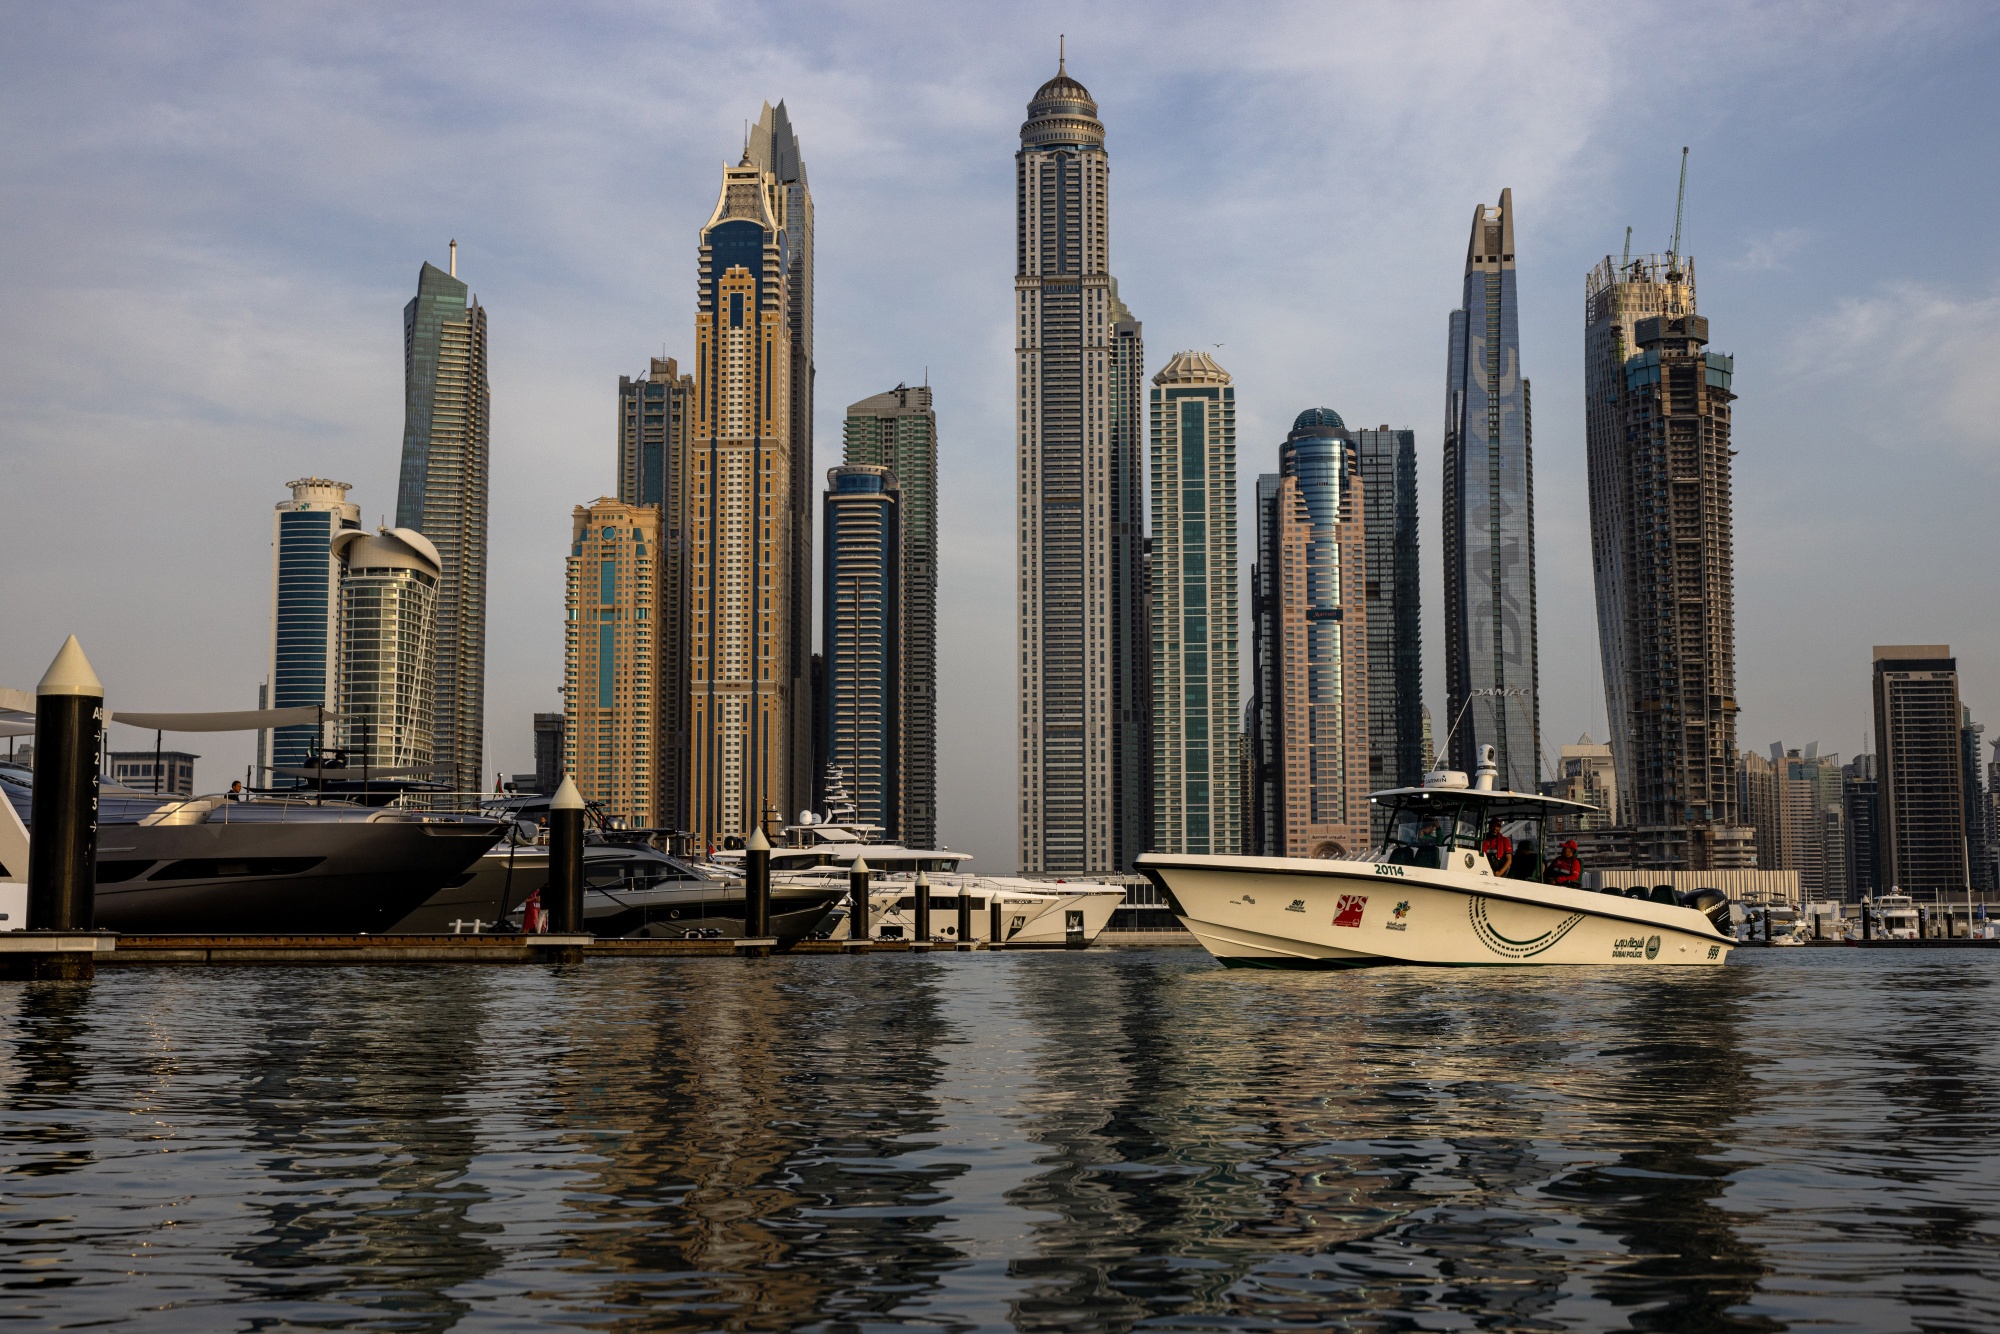 A police boat patrols the waters of the Dubai Marina on March 9.